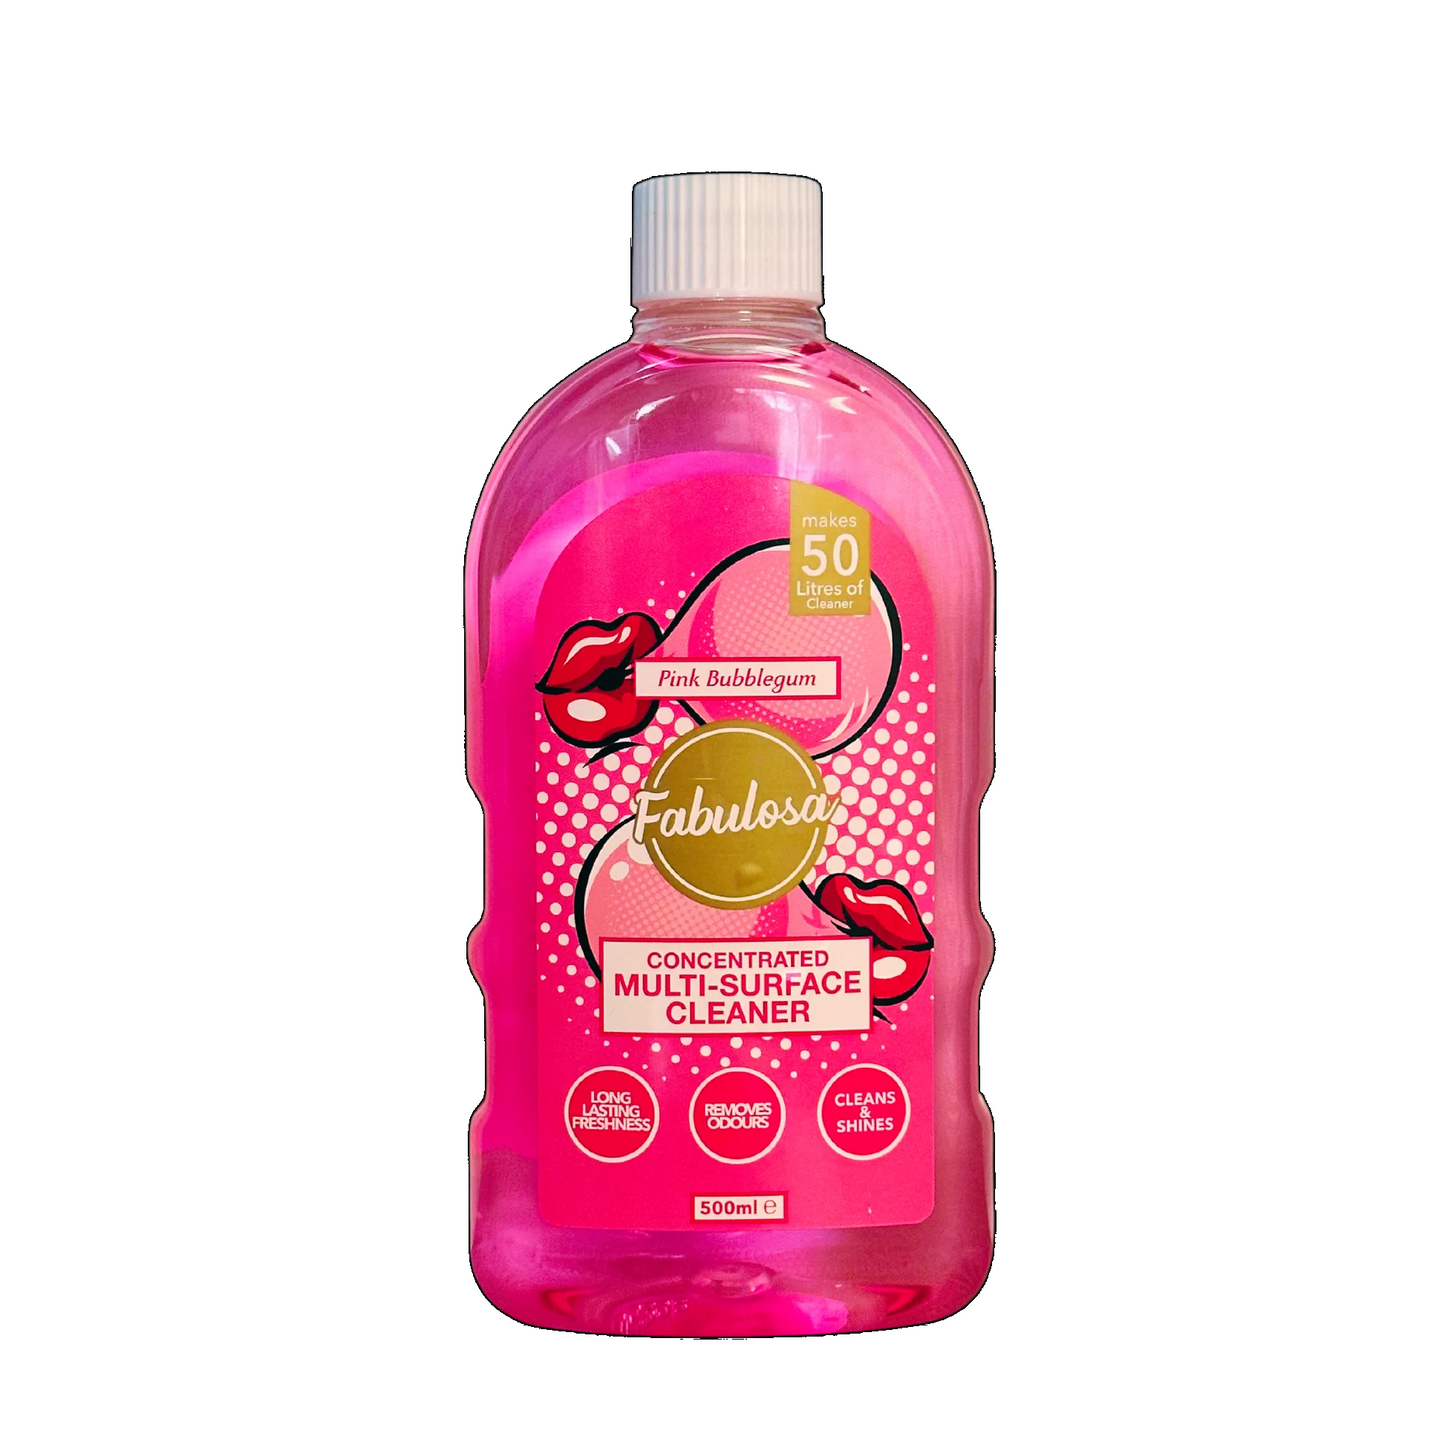 Fabulosa Concentrated Multi Surface Cleaner - Pink Bubblegum